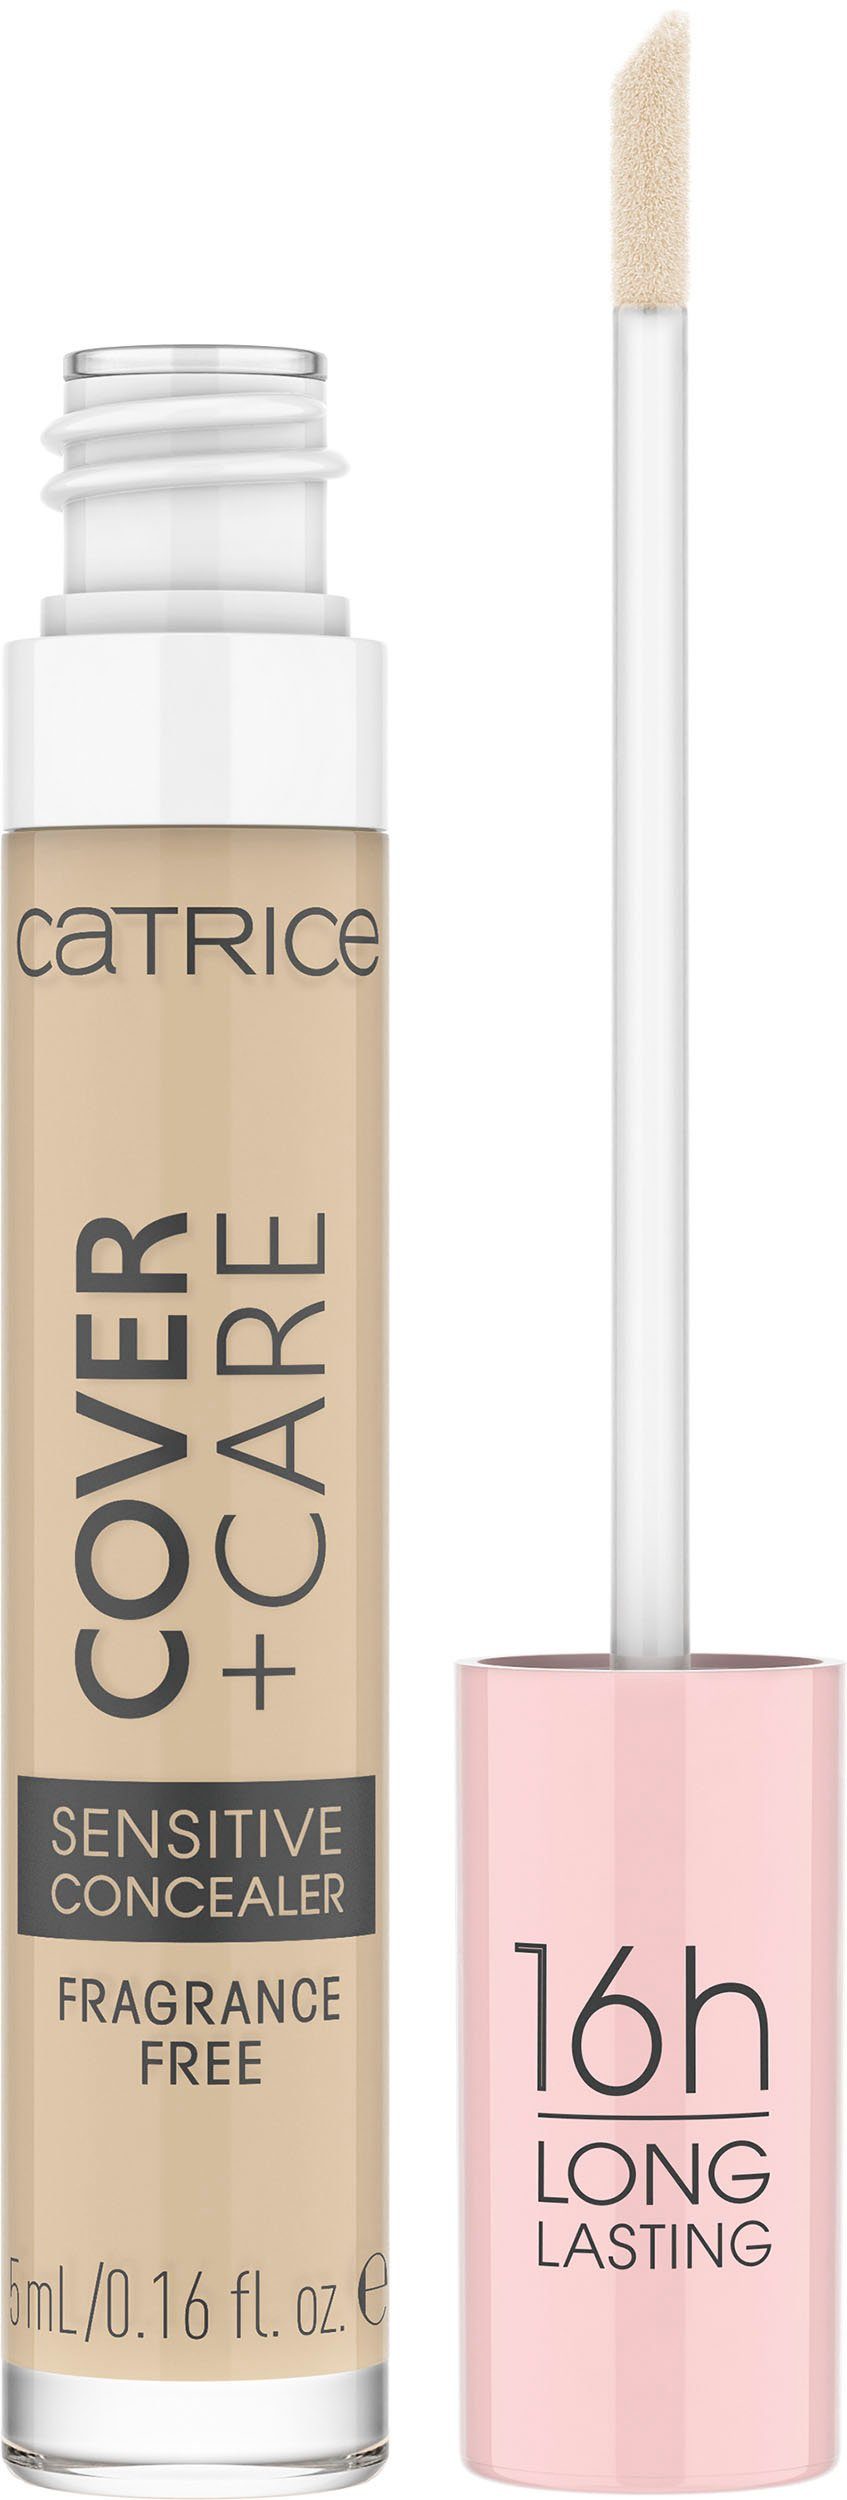 Catrice Concealer Catrice Cover + Concealer, 002N nude Sensitive 3-tlg. Care